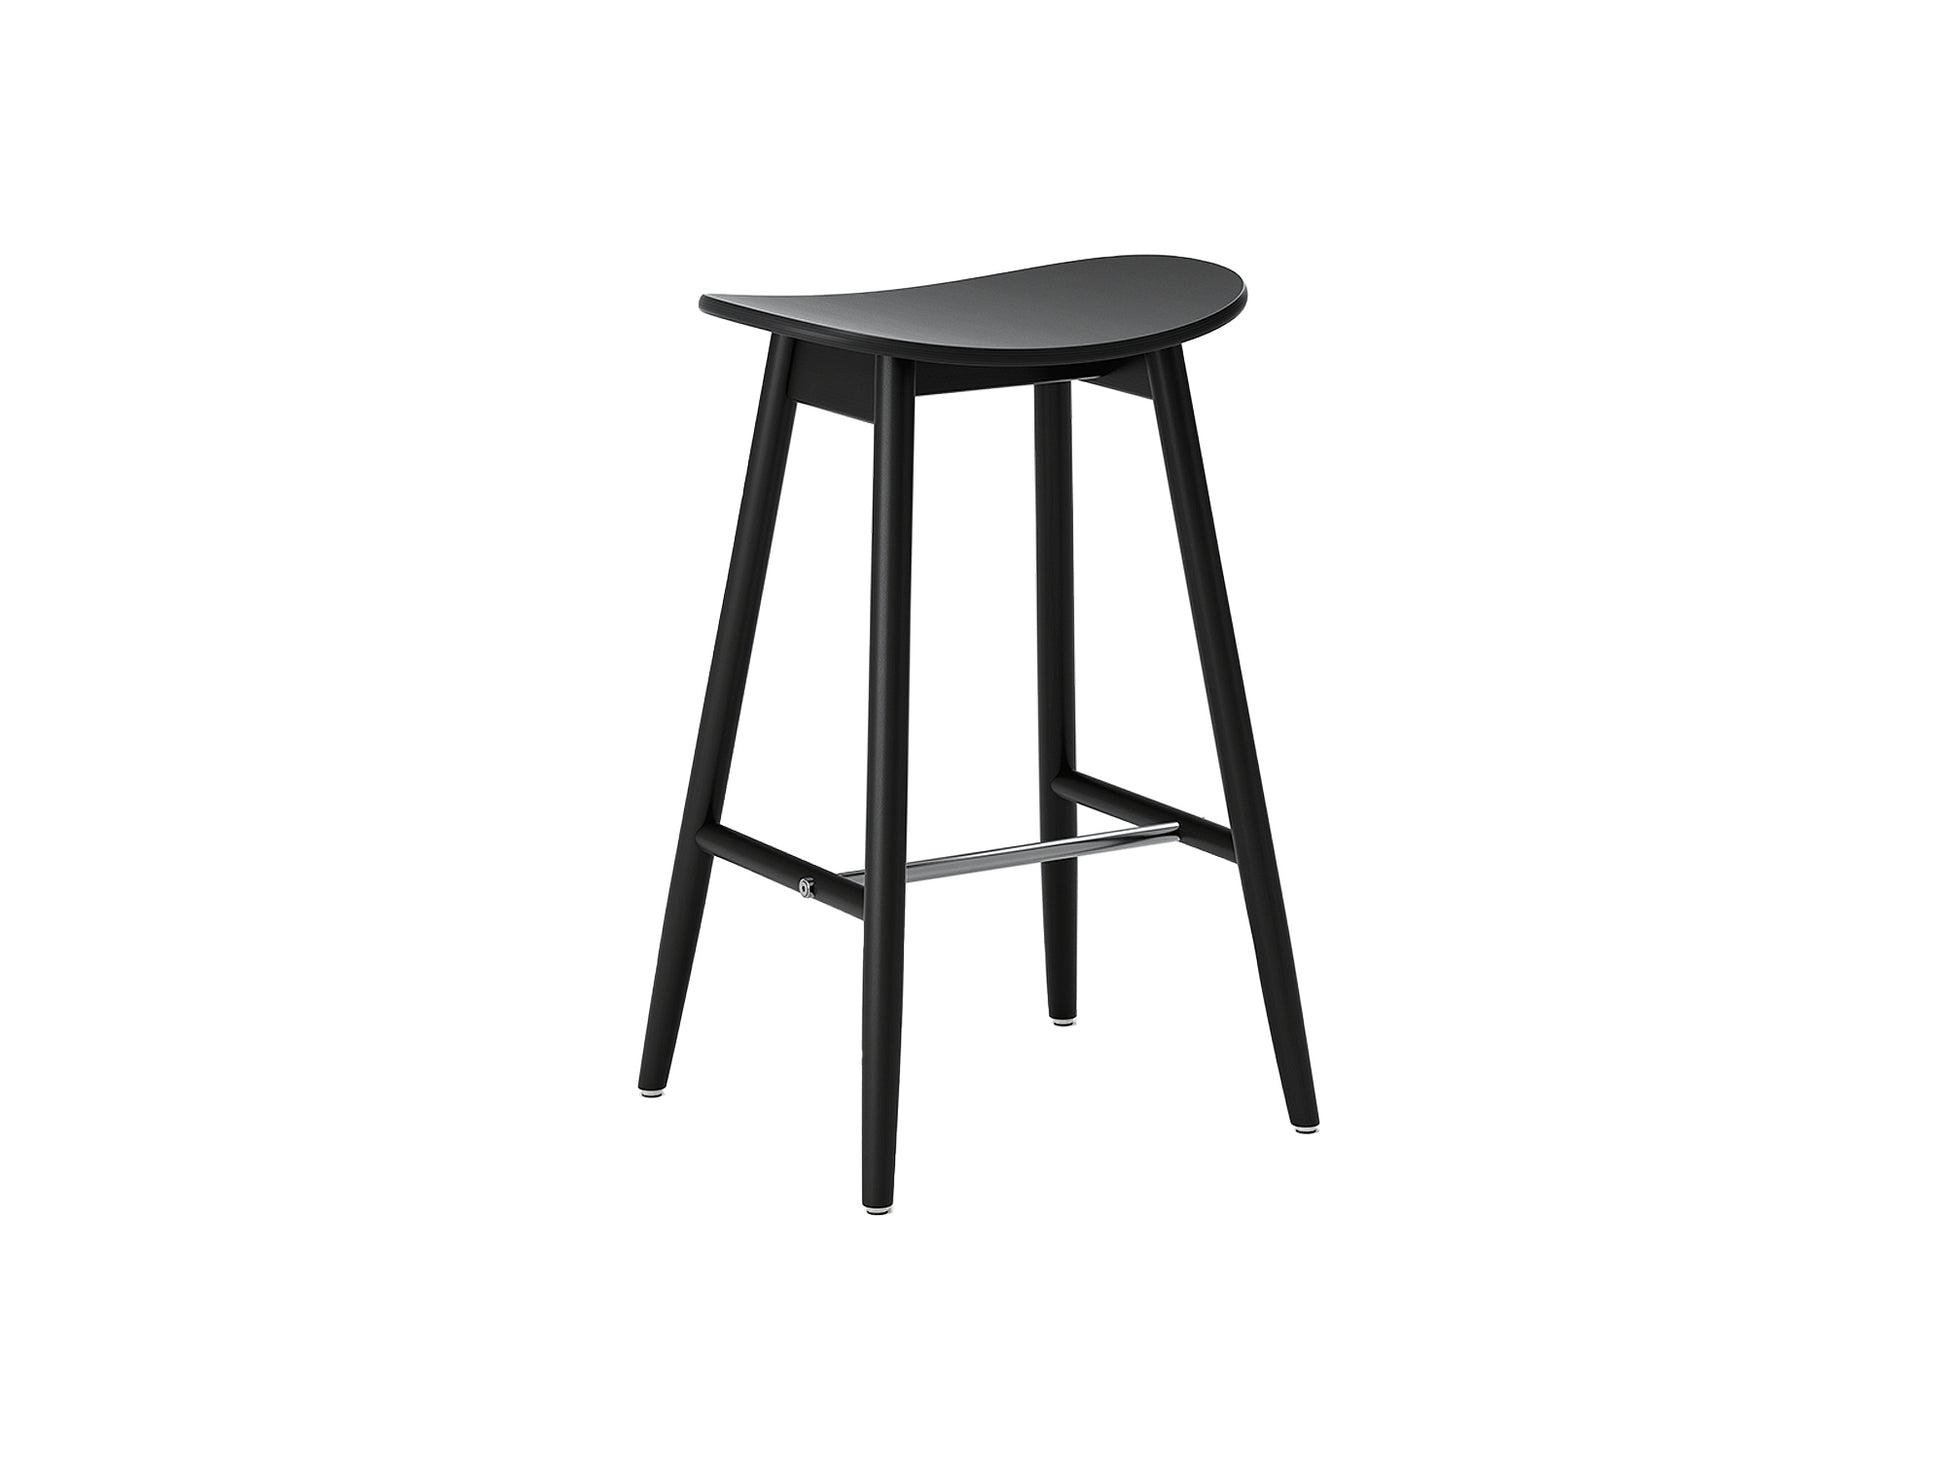 Icha Bar Stool by Massproductions - H650 / Black Stained Beech